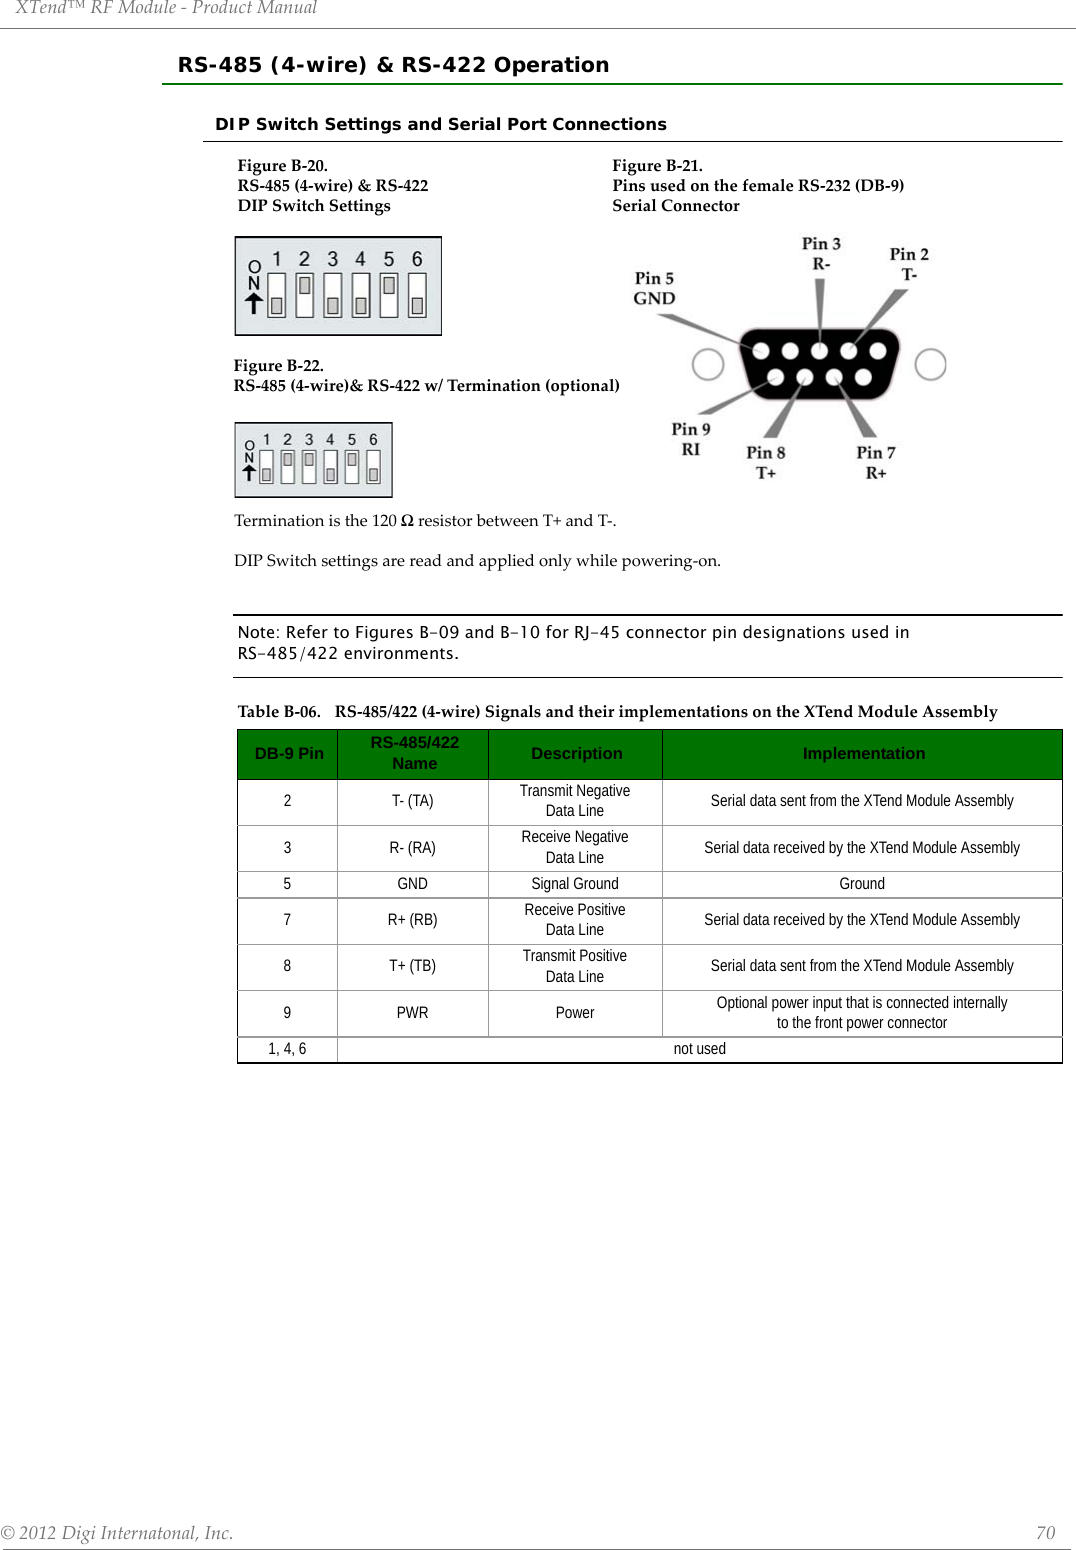 XTend™ RF Module - Product Manual © 2012 Digi Internatonal, Inc.      70RS-485 (4-wire) &amp; RS-422 OperationDIP Switch Settings and Serial Port ConnectionsFigure B-20. Figure B-21. RS-485 (4-wire) &amp; RS-422  Pins used on the female RS-232 (DB-9)  DIP Switch Settings Serial Connector Note: Refer to Figures B-09 and B-10 for RJ-45 connector pin designations used in  RS-485/422 environments.Table B-06. RS-485/422 (4-wire) Signals and their implementations on the XTend Module AssemblyDB-9 Pin RS-485/422 Name Description Implementation2T- (TA)Transmit NegativeData Line  Serial data sent from the XTend Module Assembly3R- (RA)Receive NegativeData Line Serial data received by the XTend Module Assembly5 GND Signal Ground Ground7 R+ (RB) Receive PositiveData Line  Serial data received by the XTend Module Assembly8T+ (TB)Transmit PositiveData Line Serial data sent from the XTend Module Assembly9PWR Power Optional power input that is connected internallyto the front power connector1, 4, 6 not usedFigure B-22. RS-485 (4-wire)&amp; RS-422 w/ Termination (optional)Termination is the 120 Ω resistor between T+ and T-.  DIP Switch settings are read and applied only while powering-on.